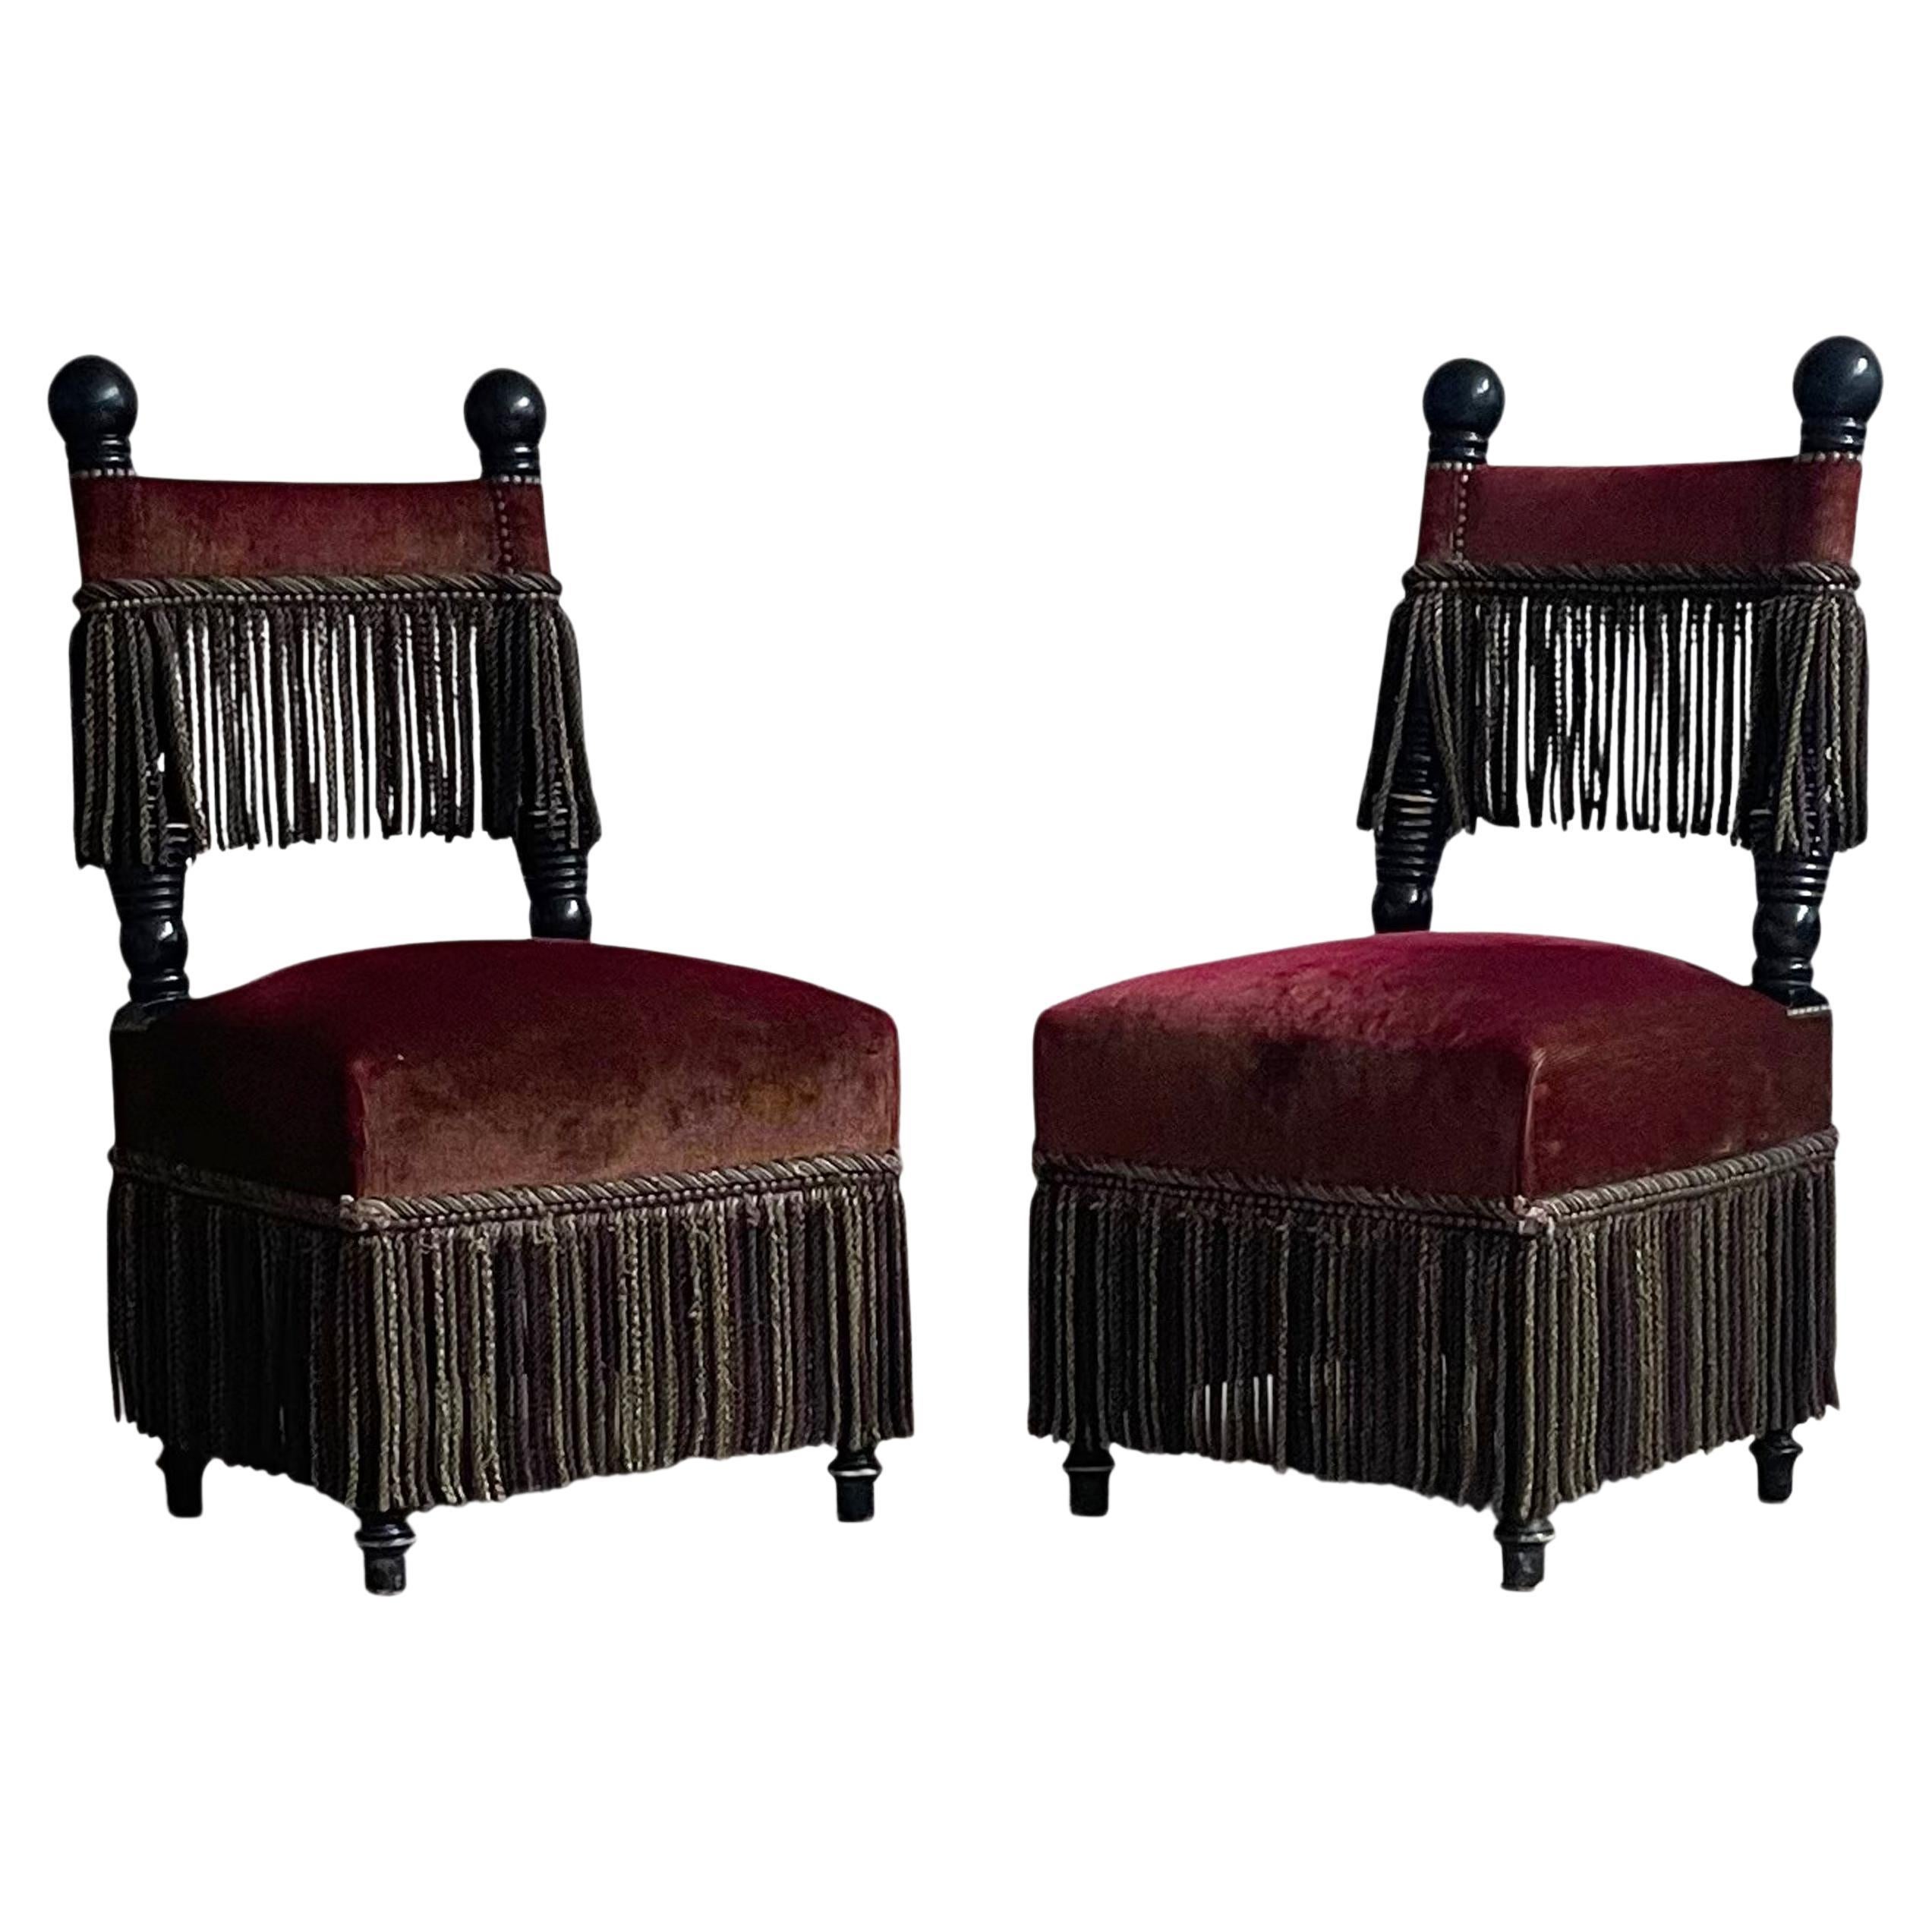 Fringed Chairs From Ladurée Patisserie For Sale